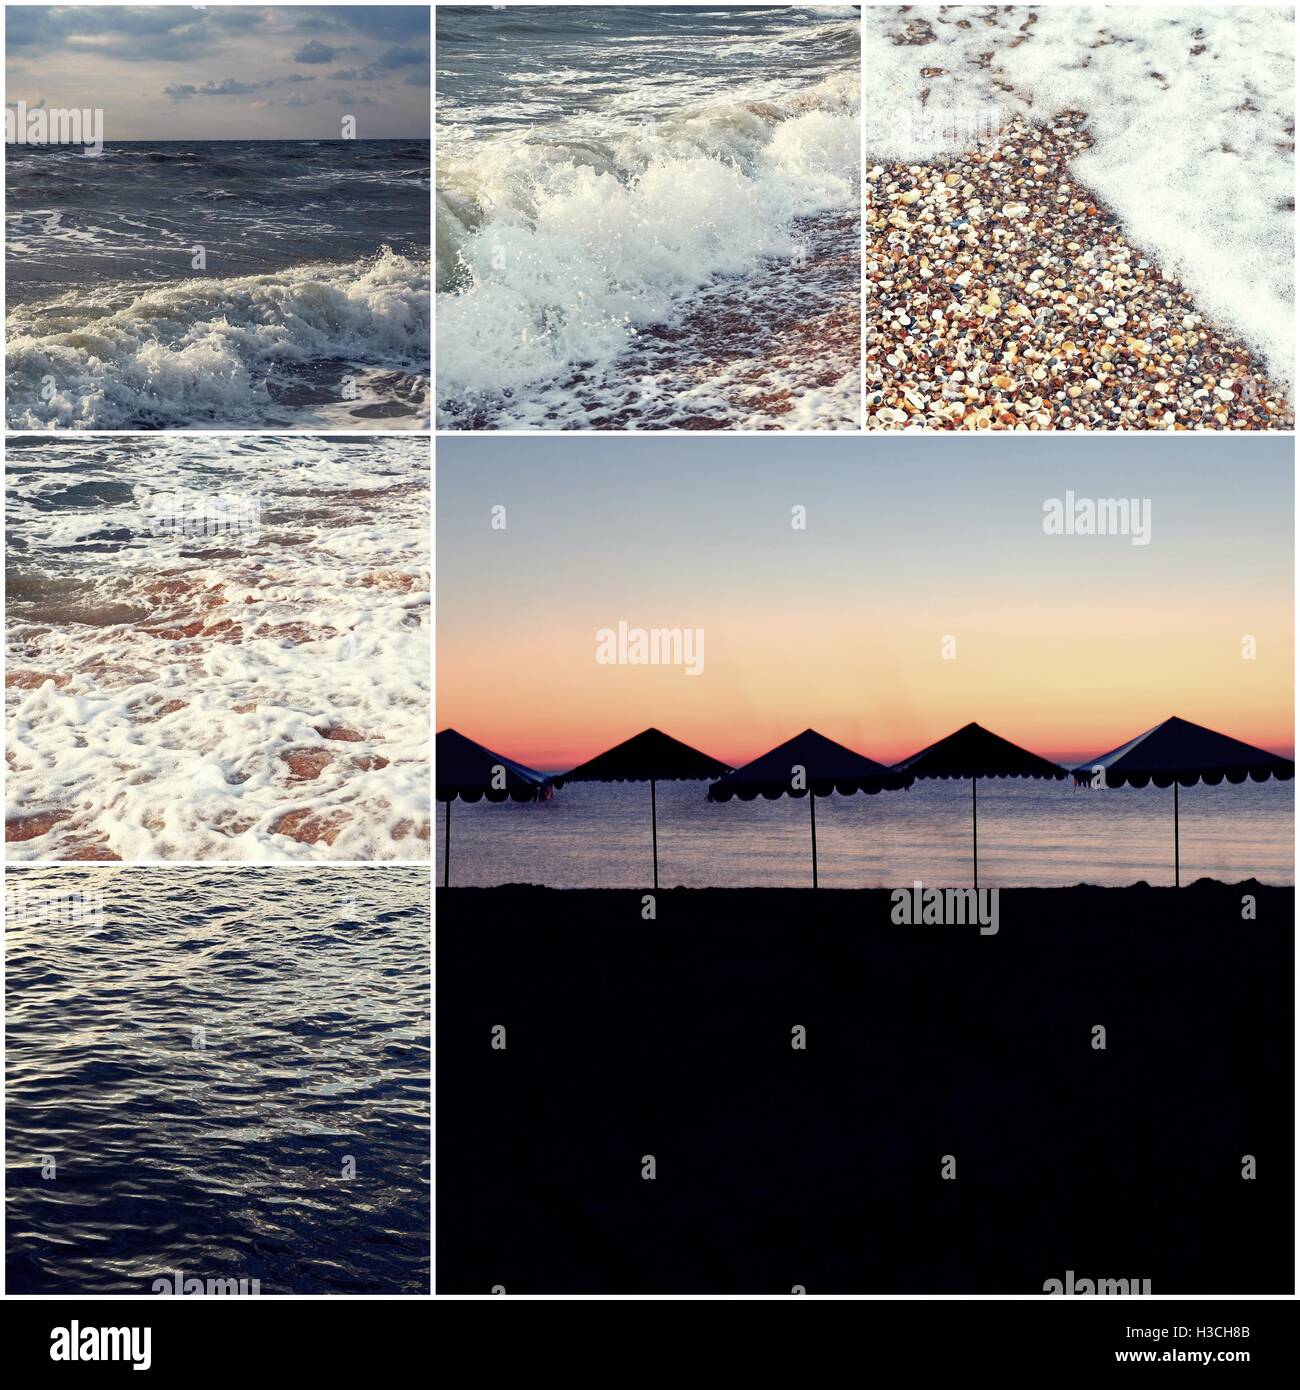 Happy summertime theme photo collage composed of colorized images of Sea of Azov and beach Umbrellas silhouettes. Stock Photo